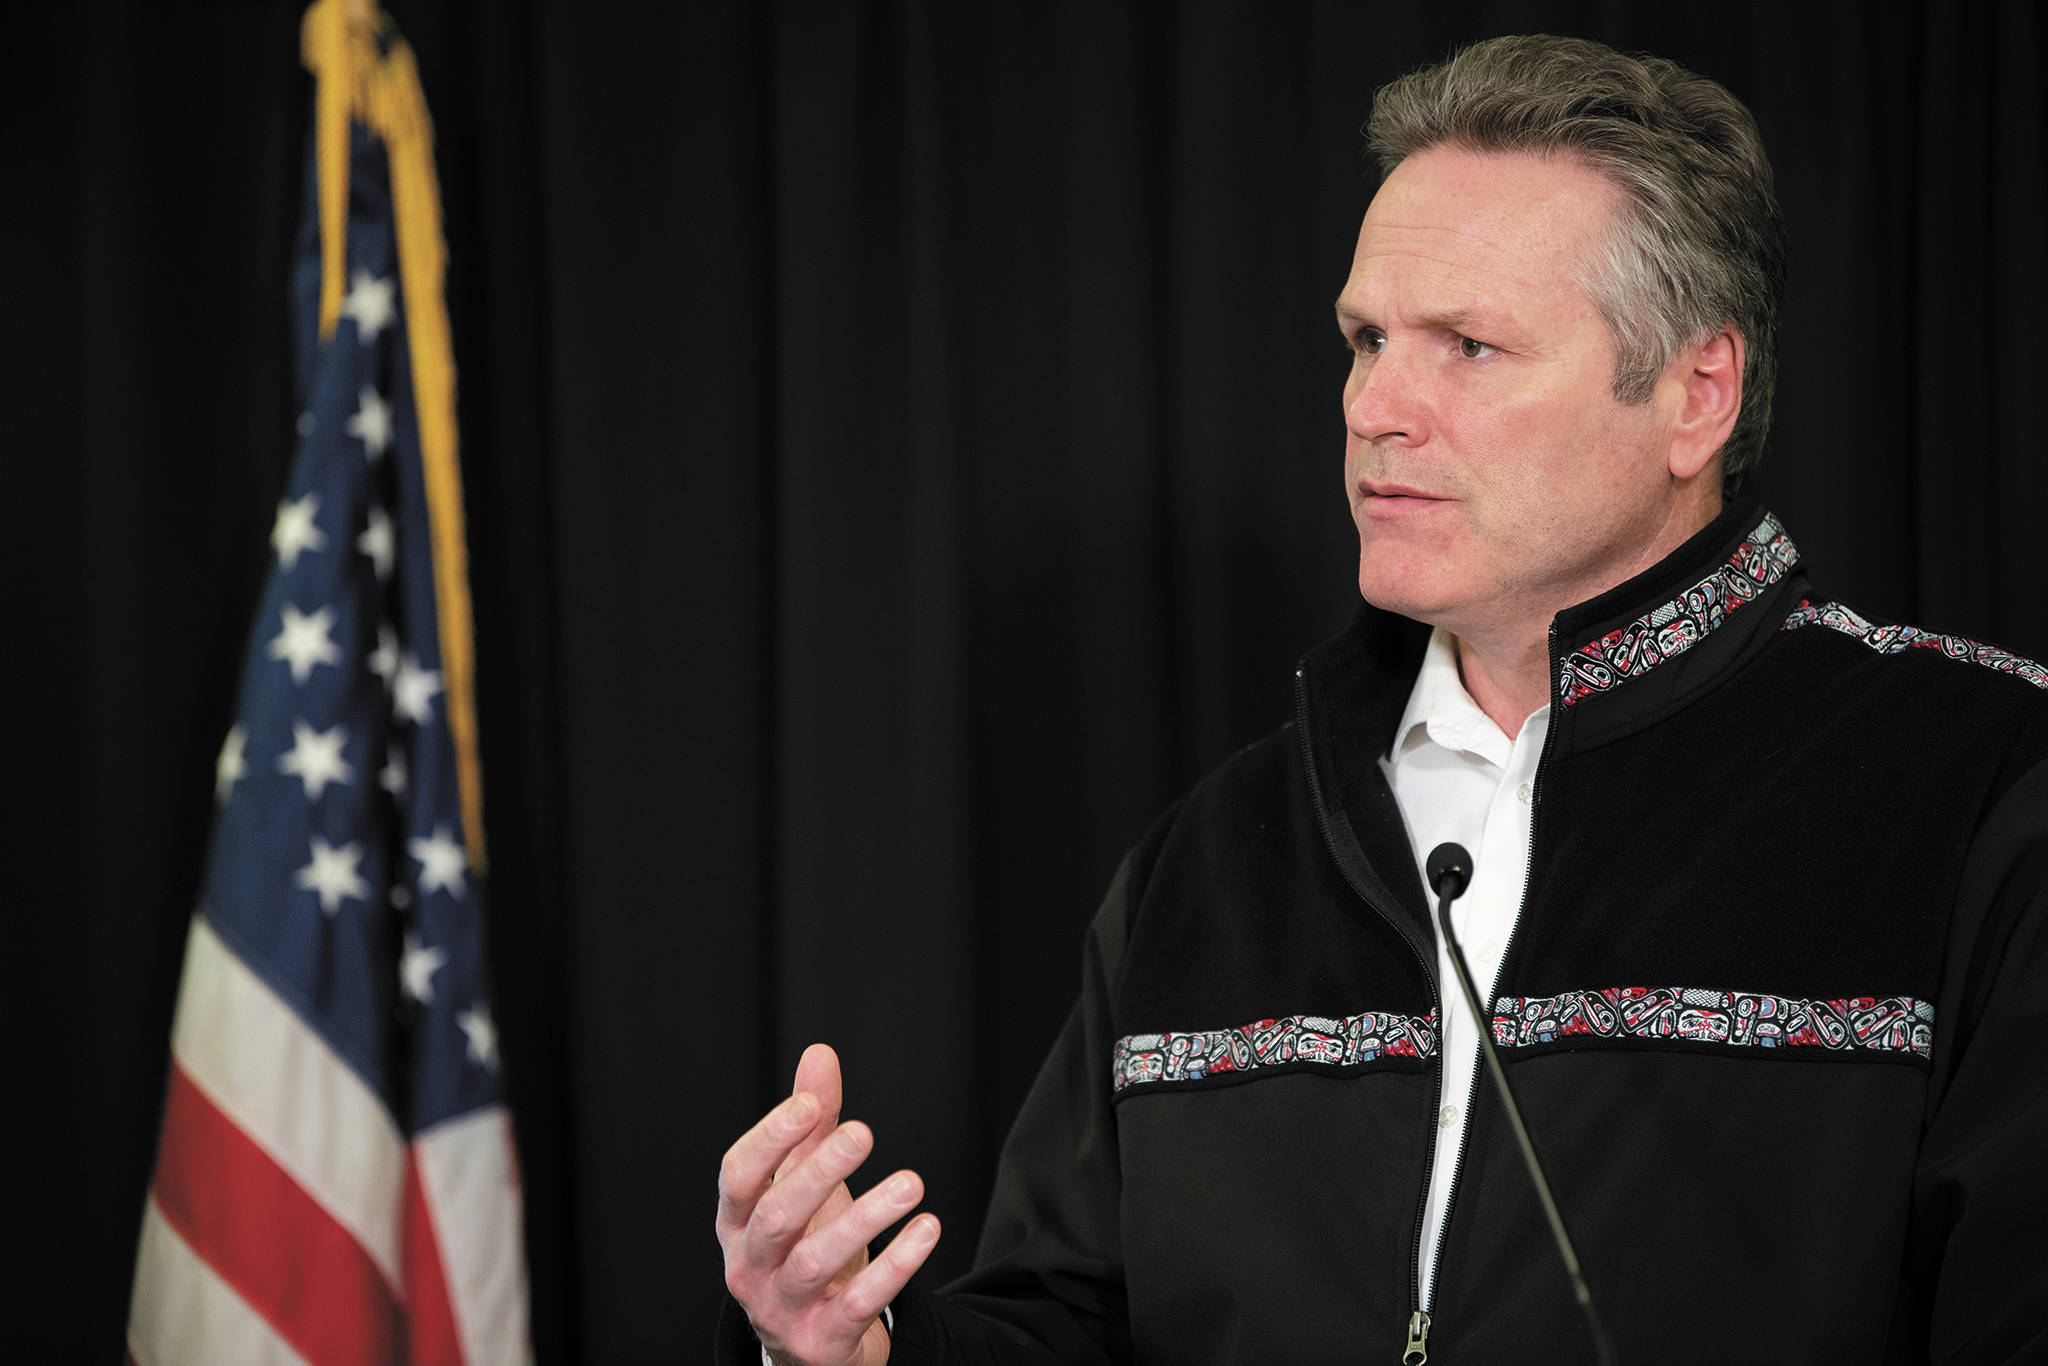 Gov. Mike Dunleavy speaks during a Thursday, April 9, 2020 press conference in the Atwood Building in Anchorage, Alaska. (Photo courtesy Office of the Governor)